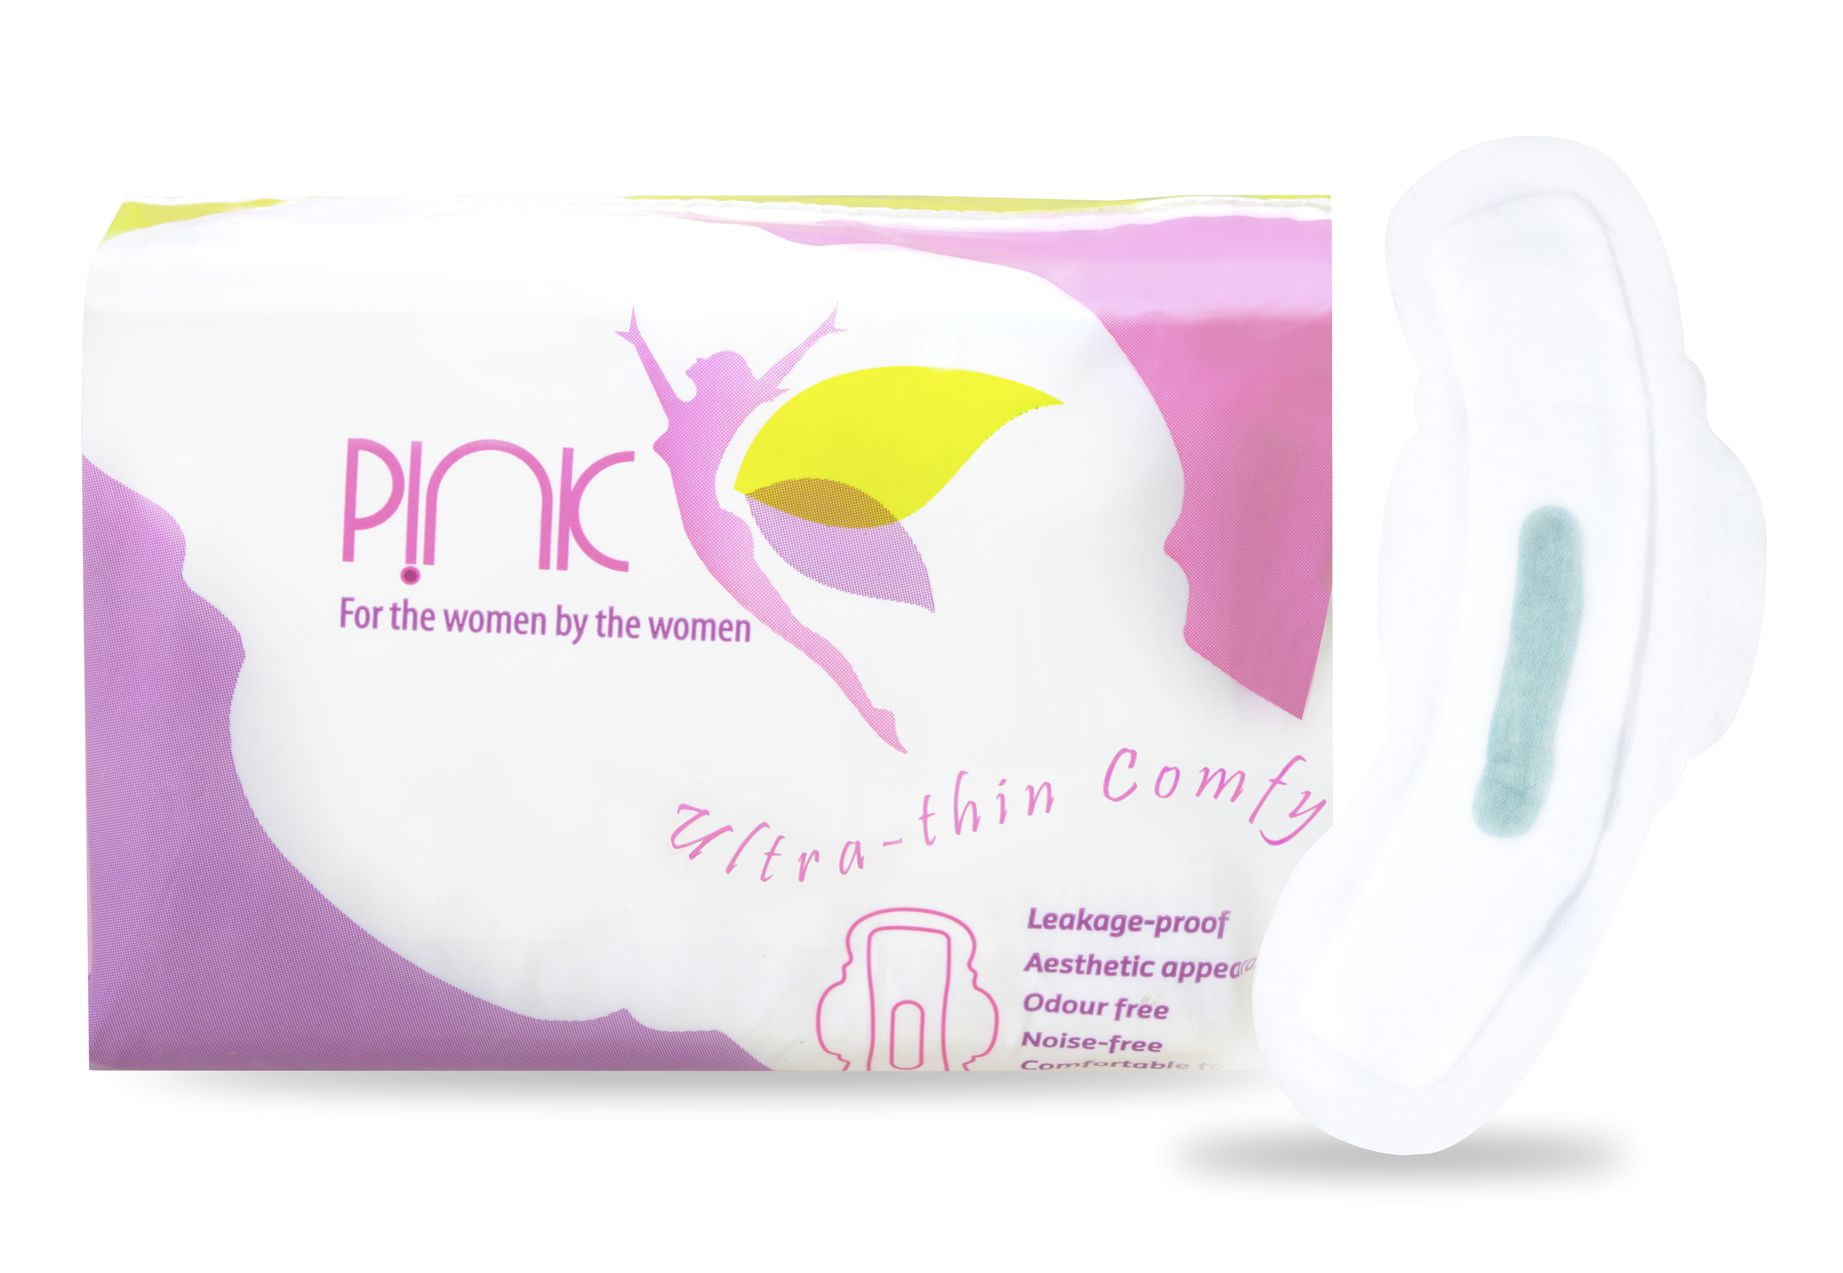 pink biodegradable comfy dry all day night protection large 21 sanitary pads pack of 3